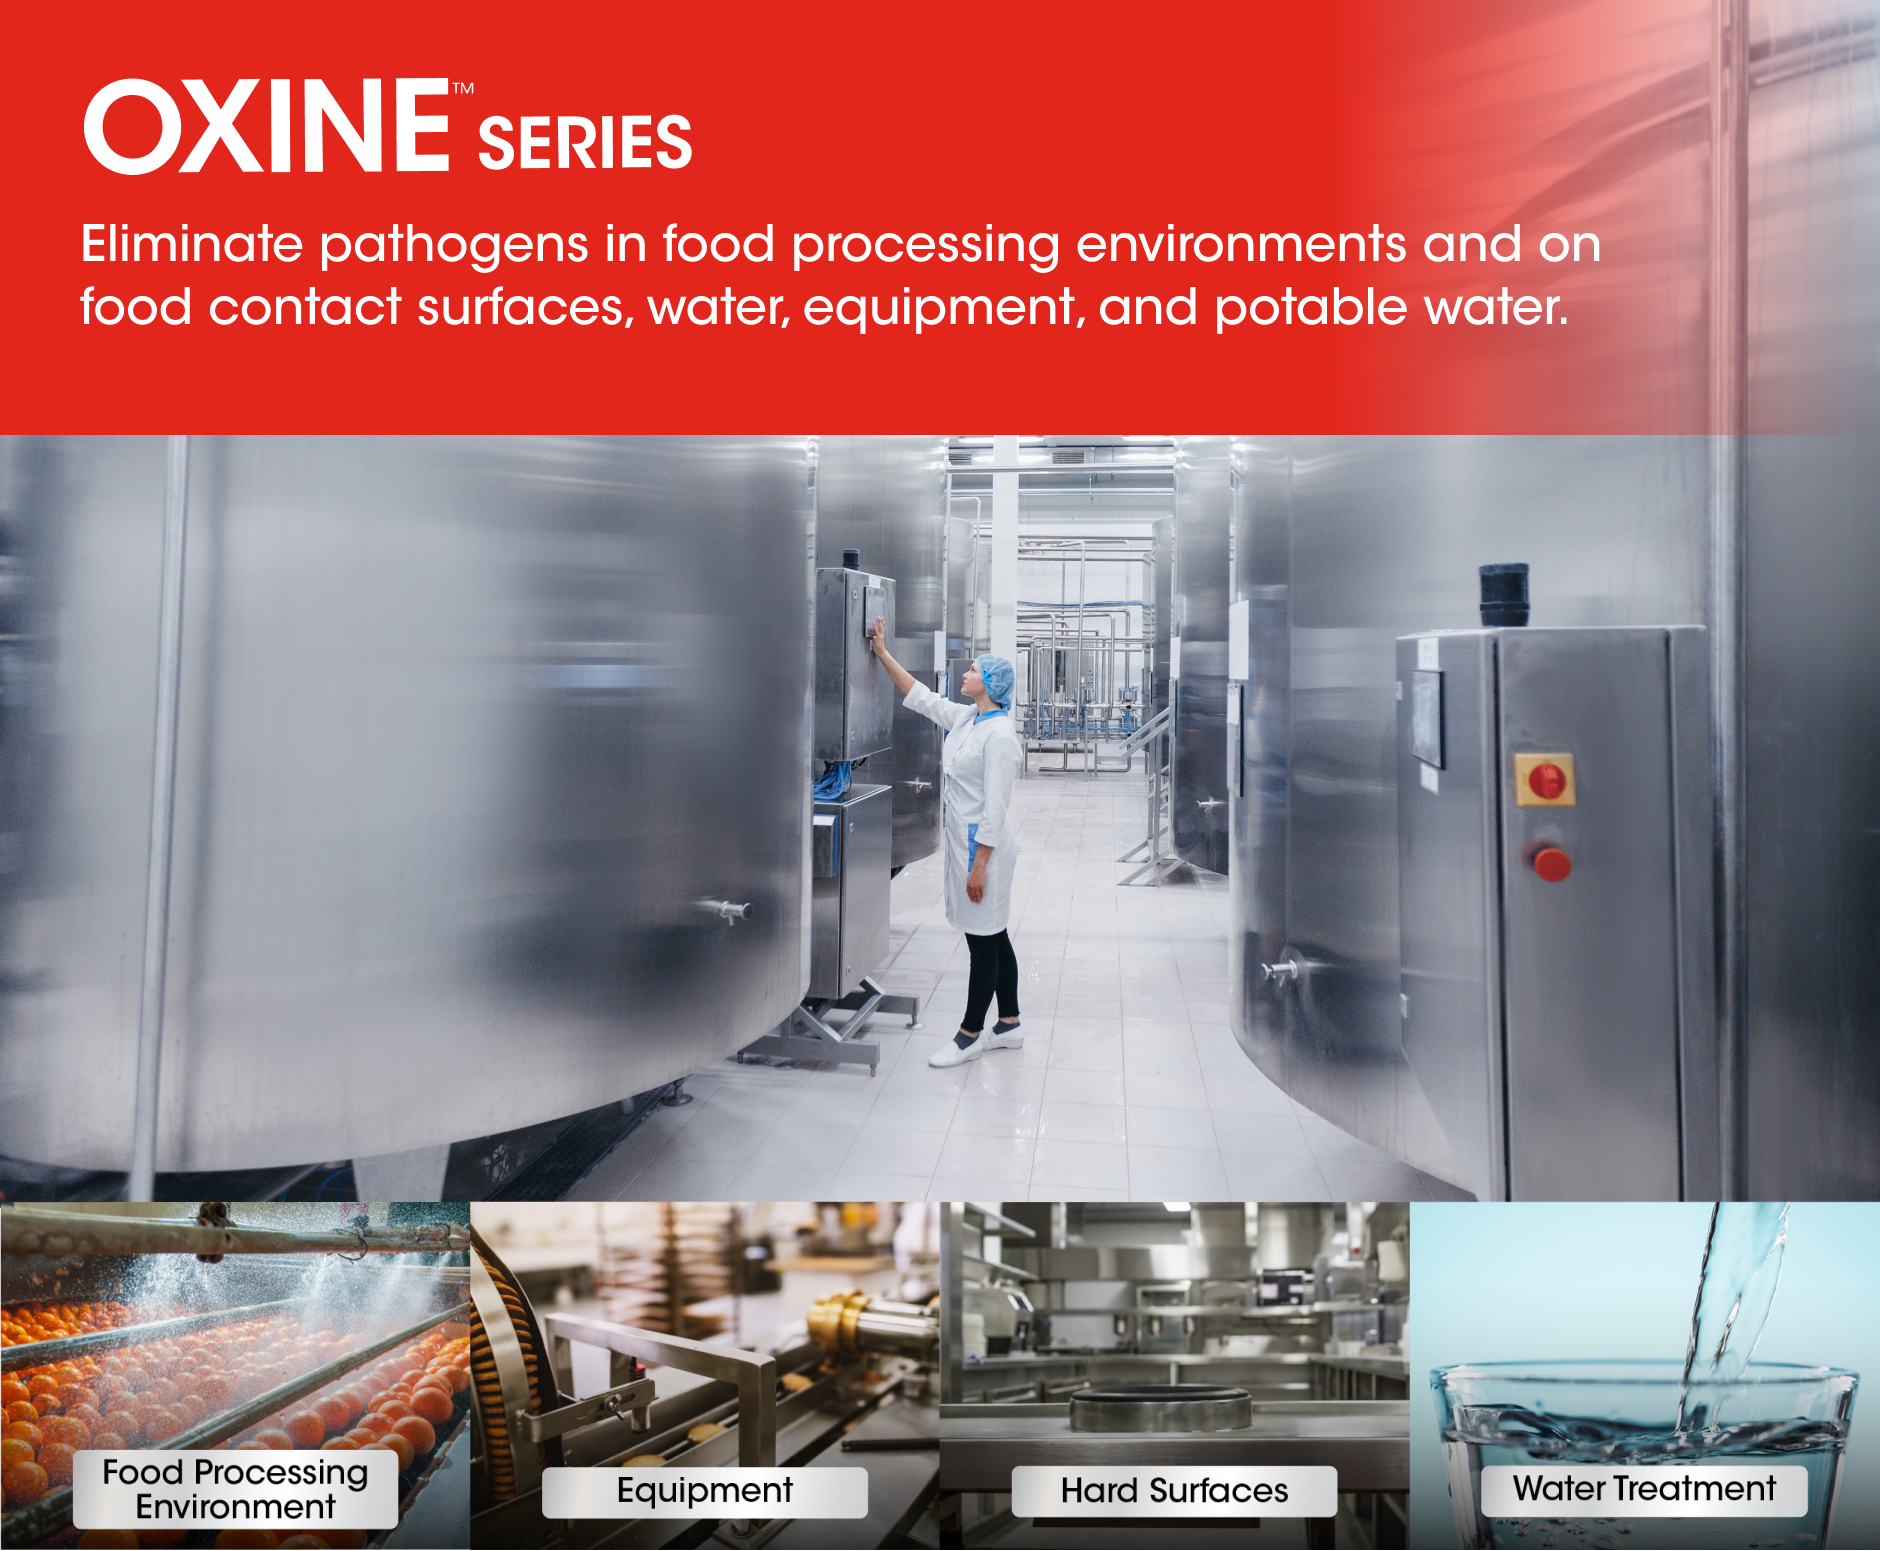 kemin-disinfection-system-oxine-series-surfaces